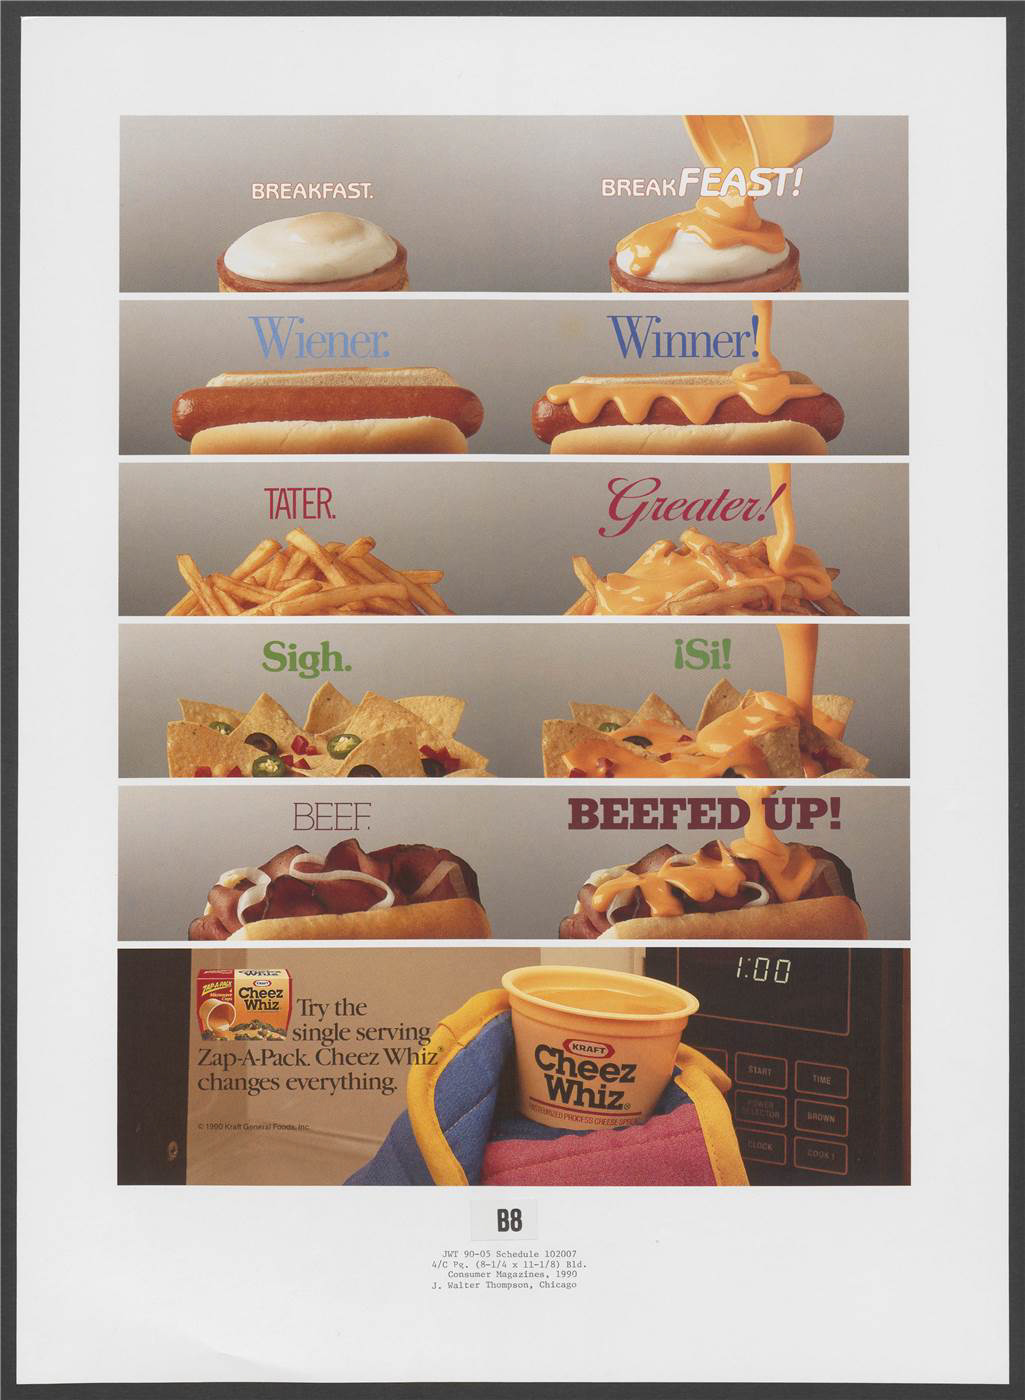 "Breakfast. BreakFEAST!" Suggests that coating eggs, hot dogs, fries, nachos, and pastrami with heated Cheez Whiz, as illustrated, makes them more attractive propositions. A Cheez Whiz Zap-a-Pack is shown being removed from a microwave oven at the foot of the page, along with an example of its packaging.